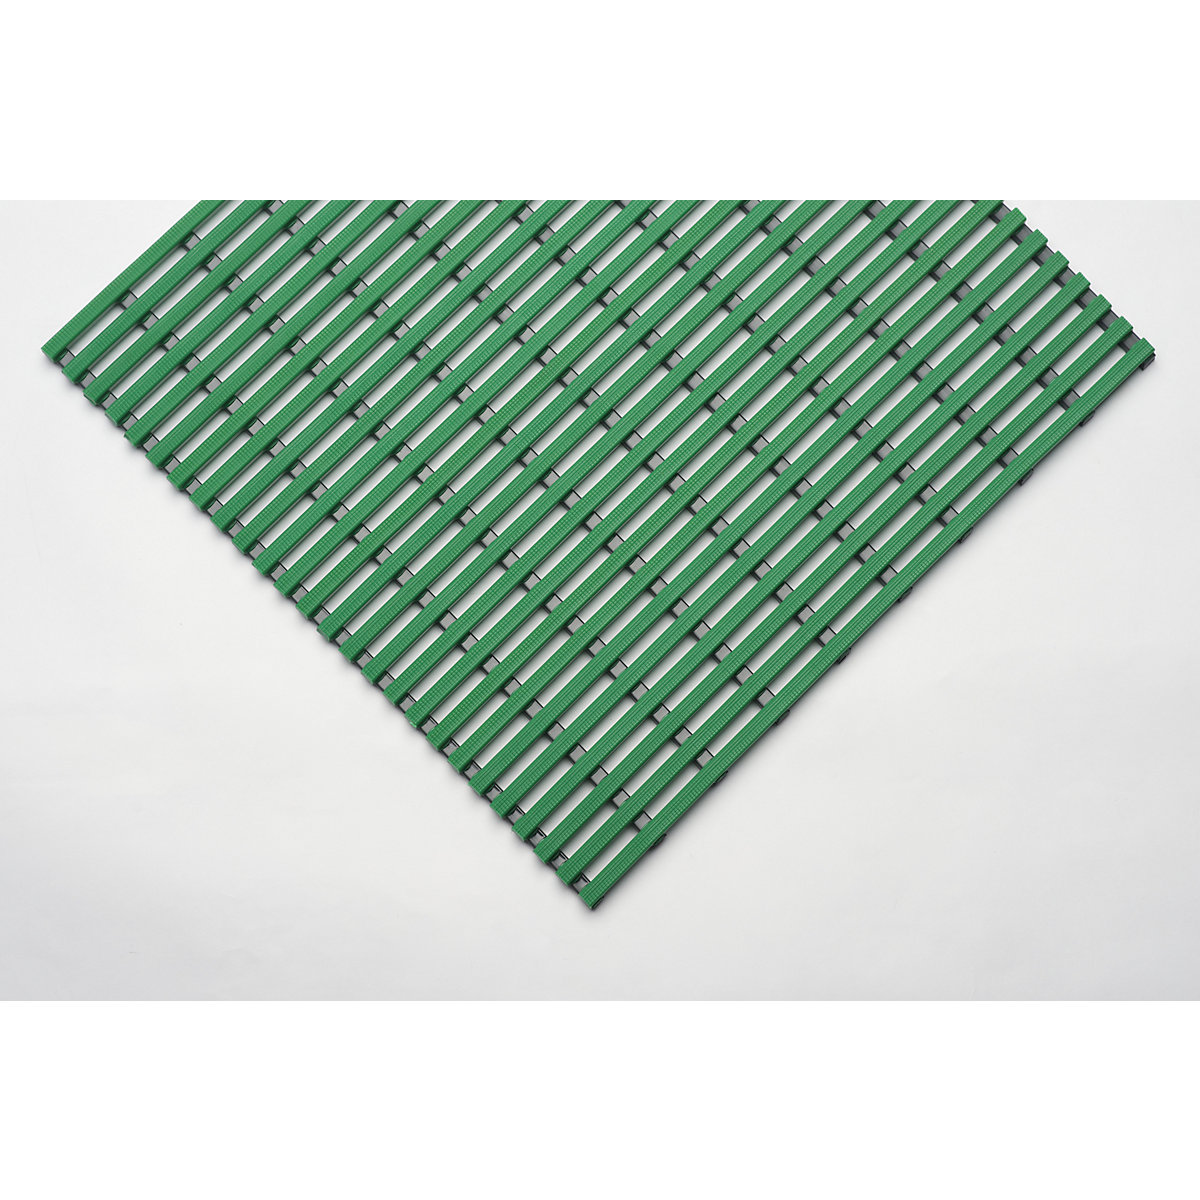 Floor mat for showers and changing rooms (Product illustration 11)